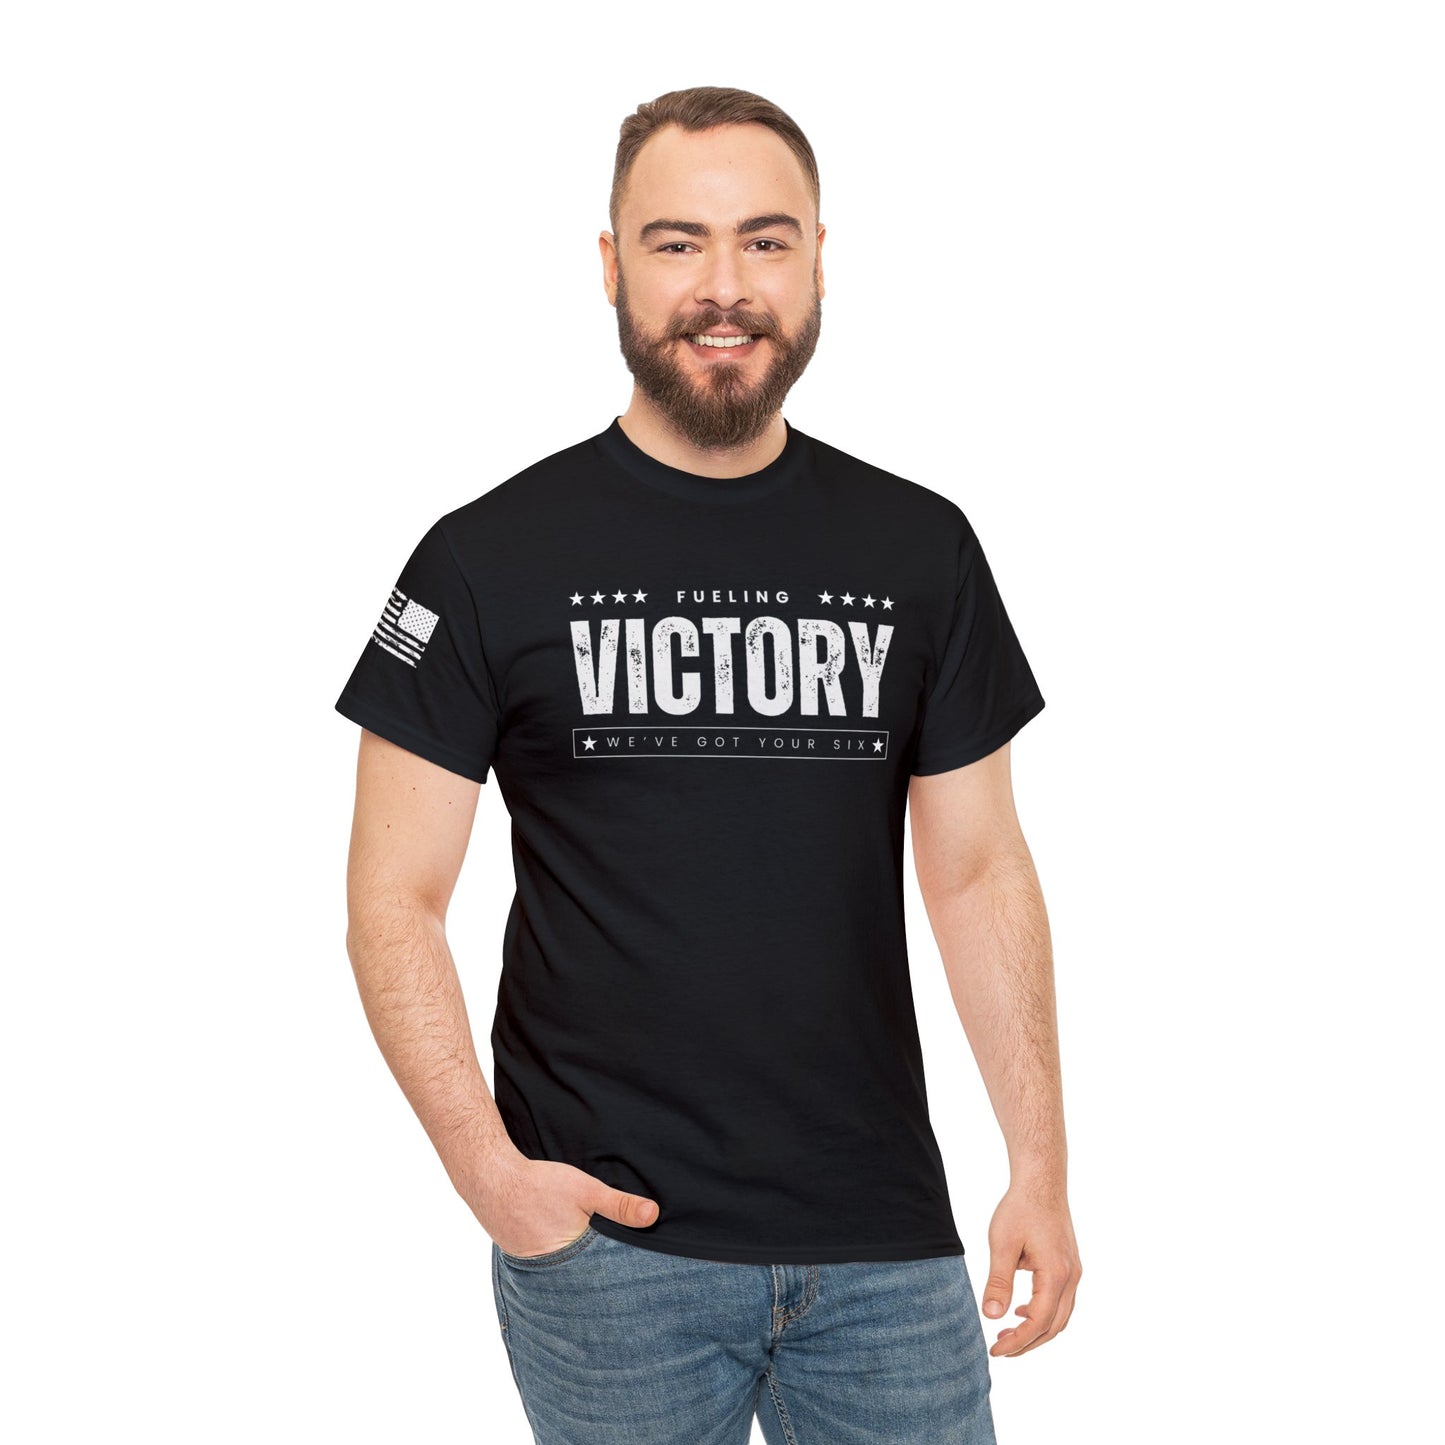 Fueling Victory T-Shirt | Ace Bean Coffee | Exclusive